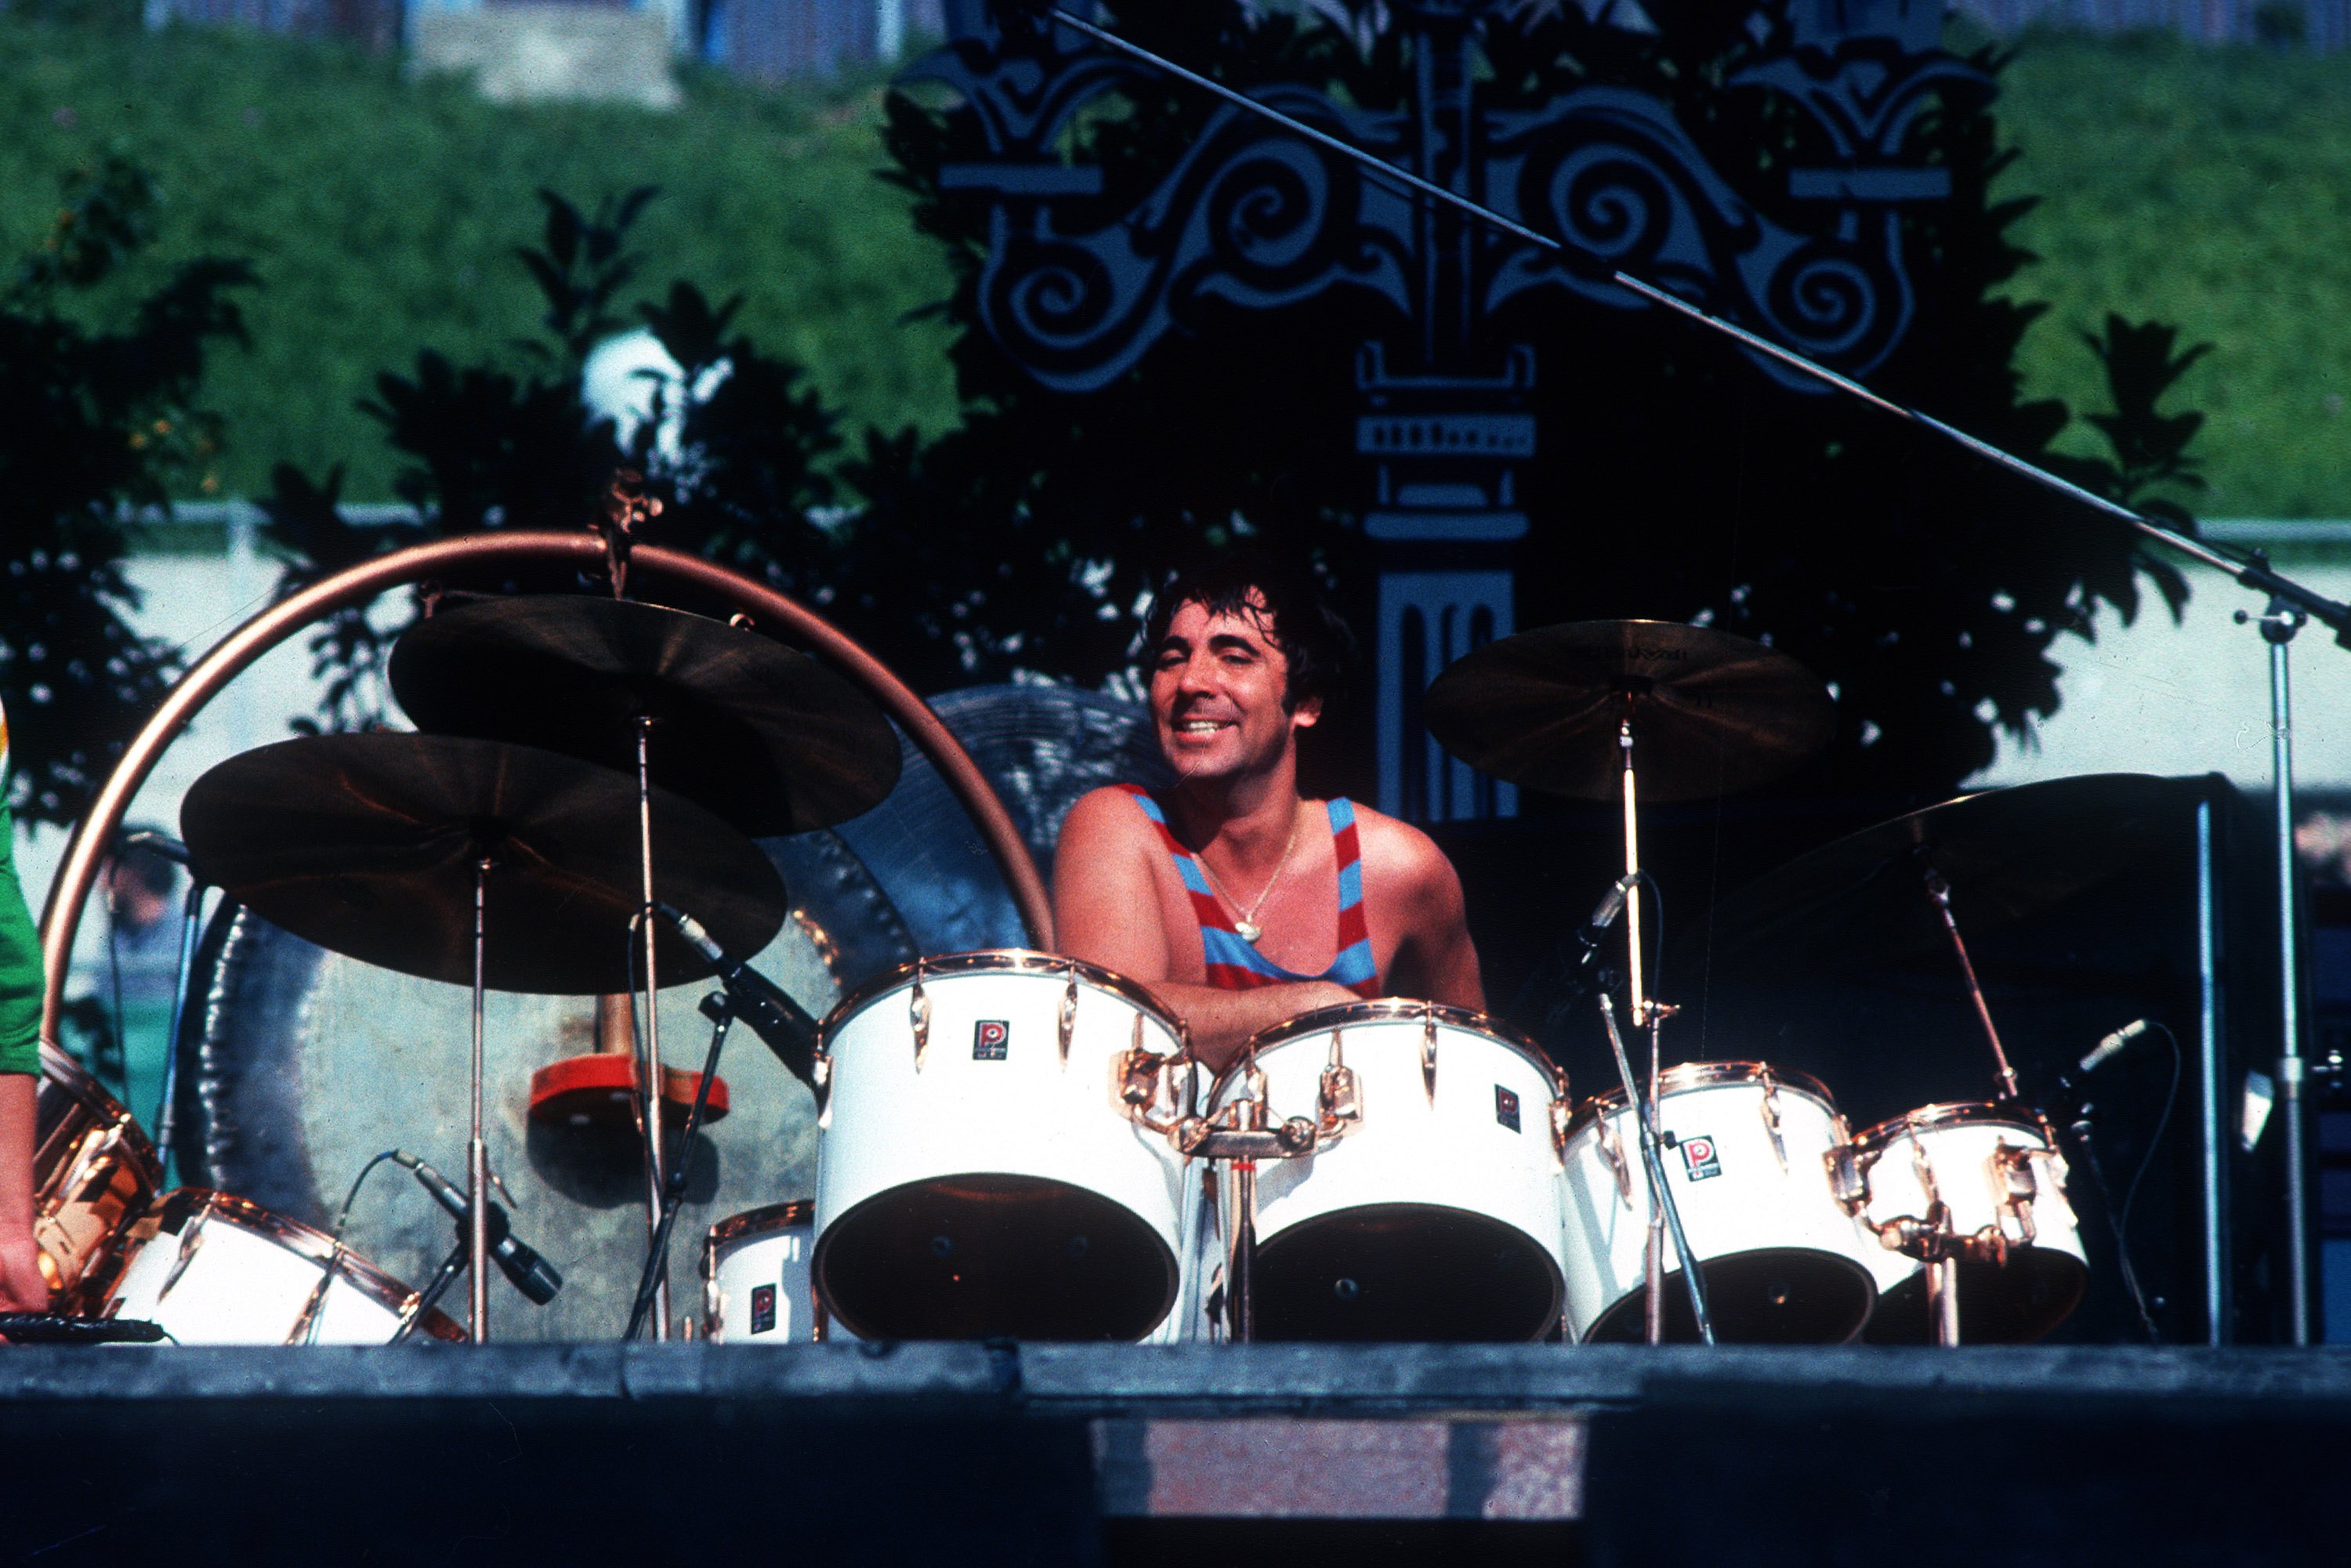 6. Keith Moon (The Who)